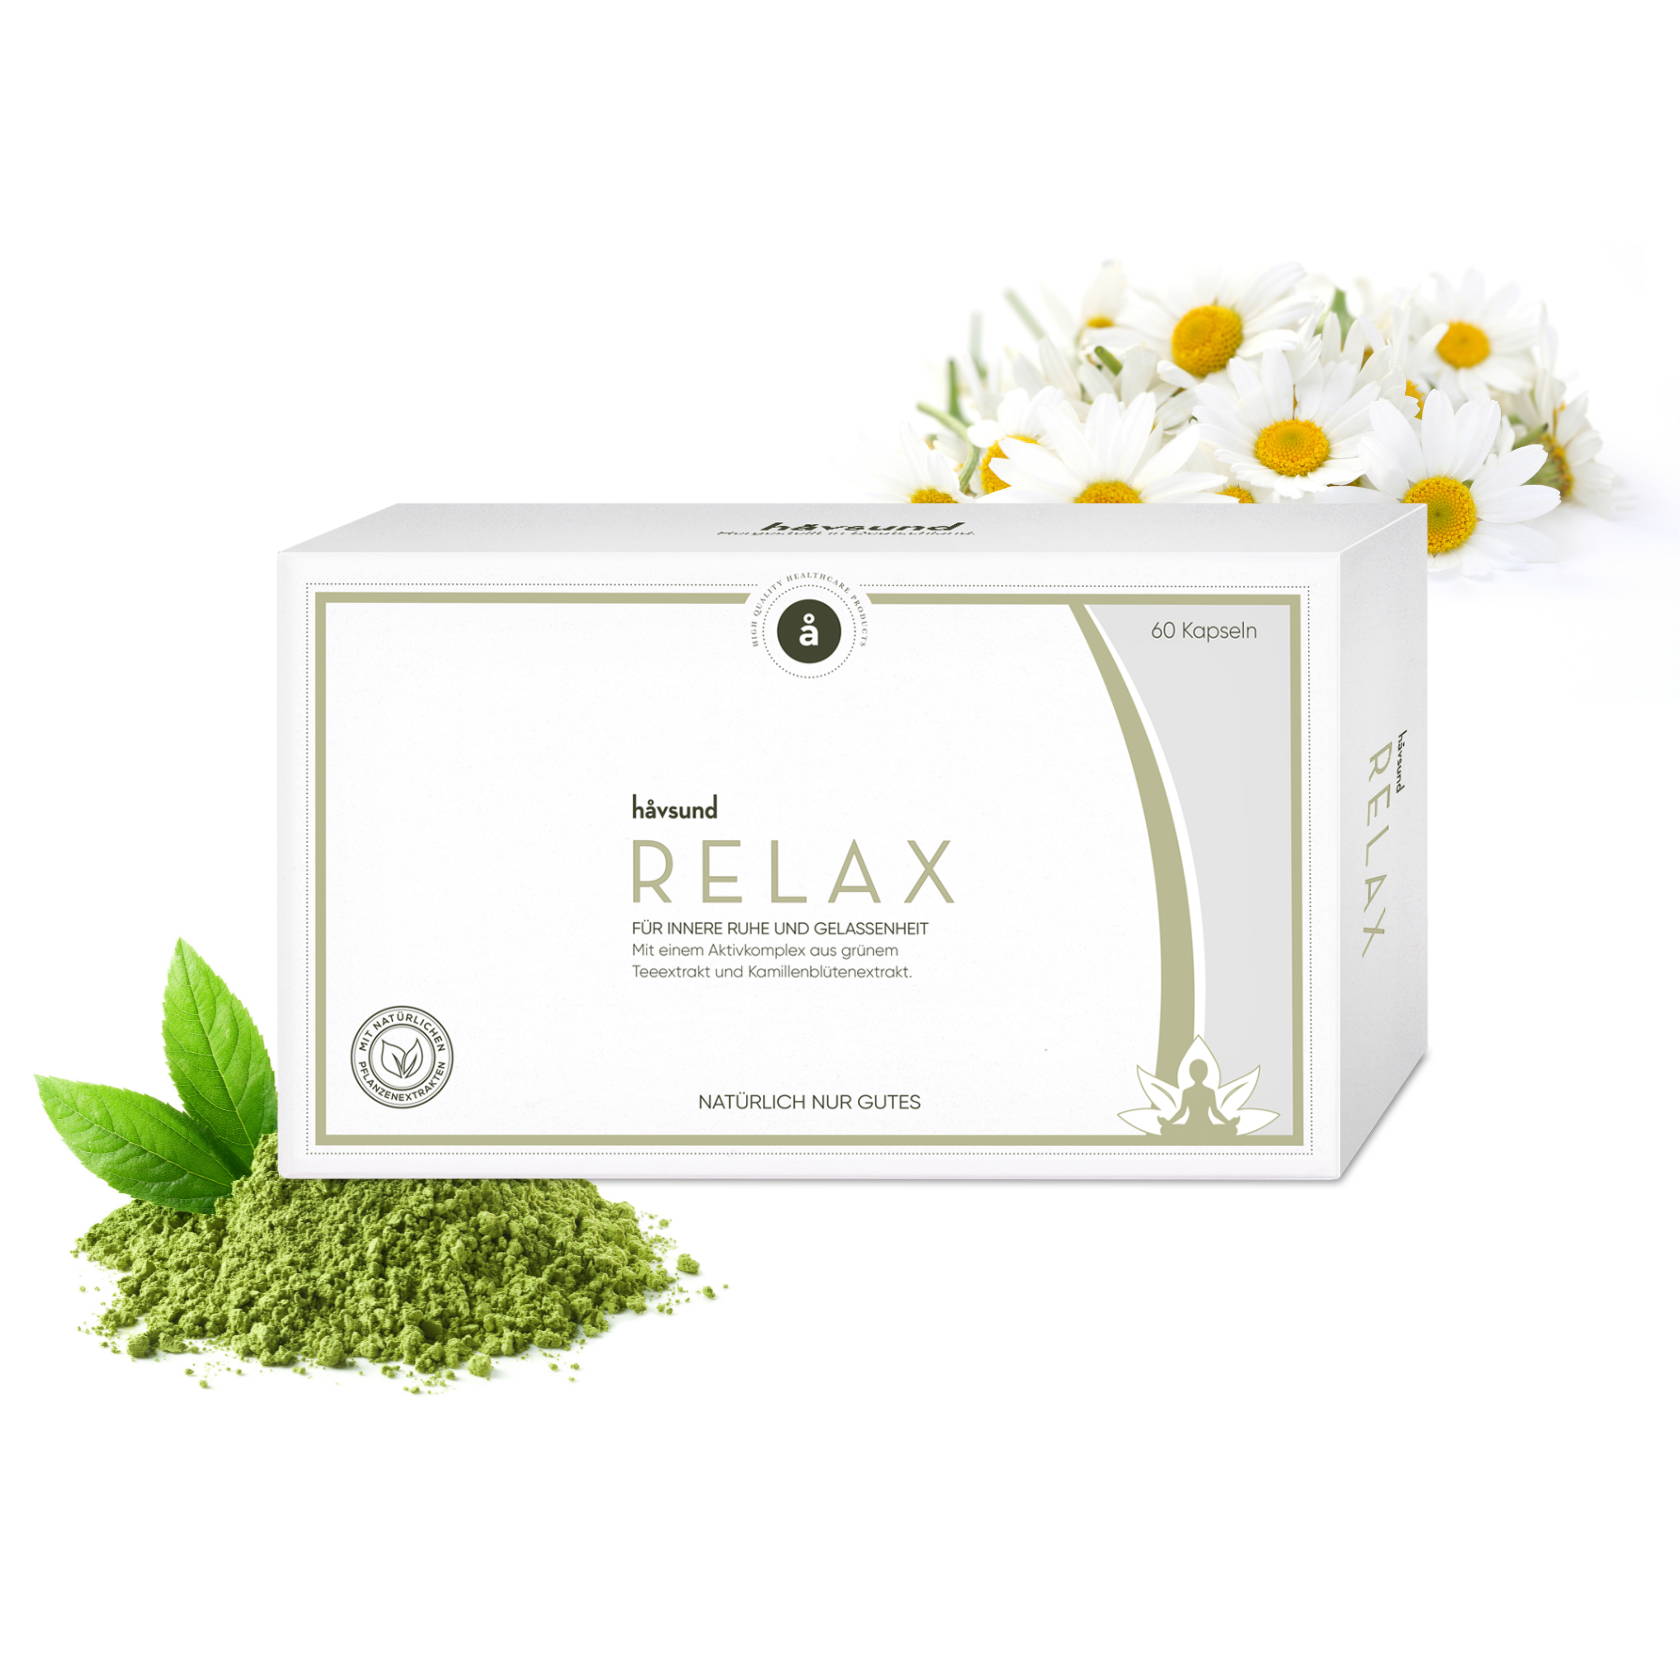 håvsund product image Relax with ingredients